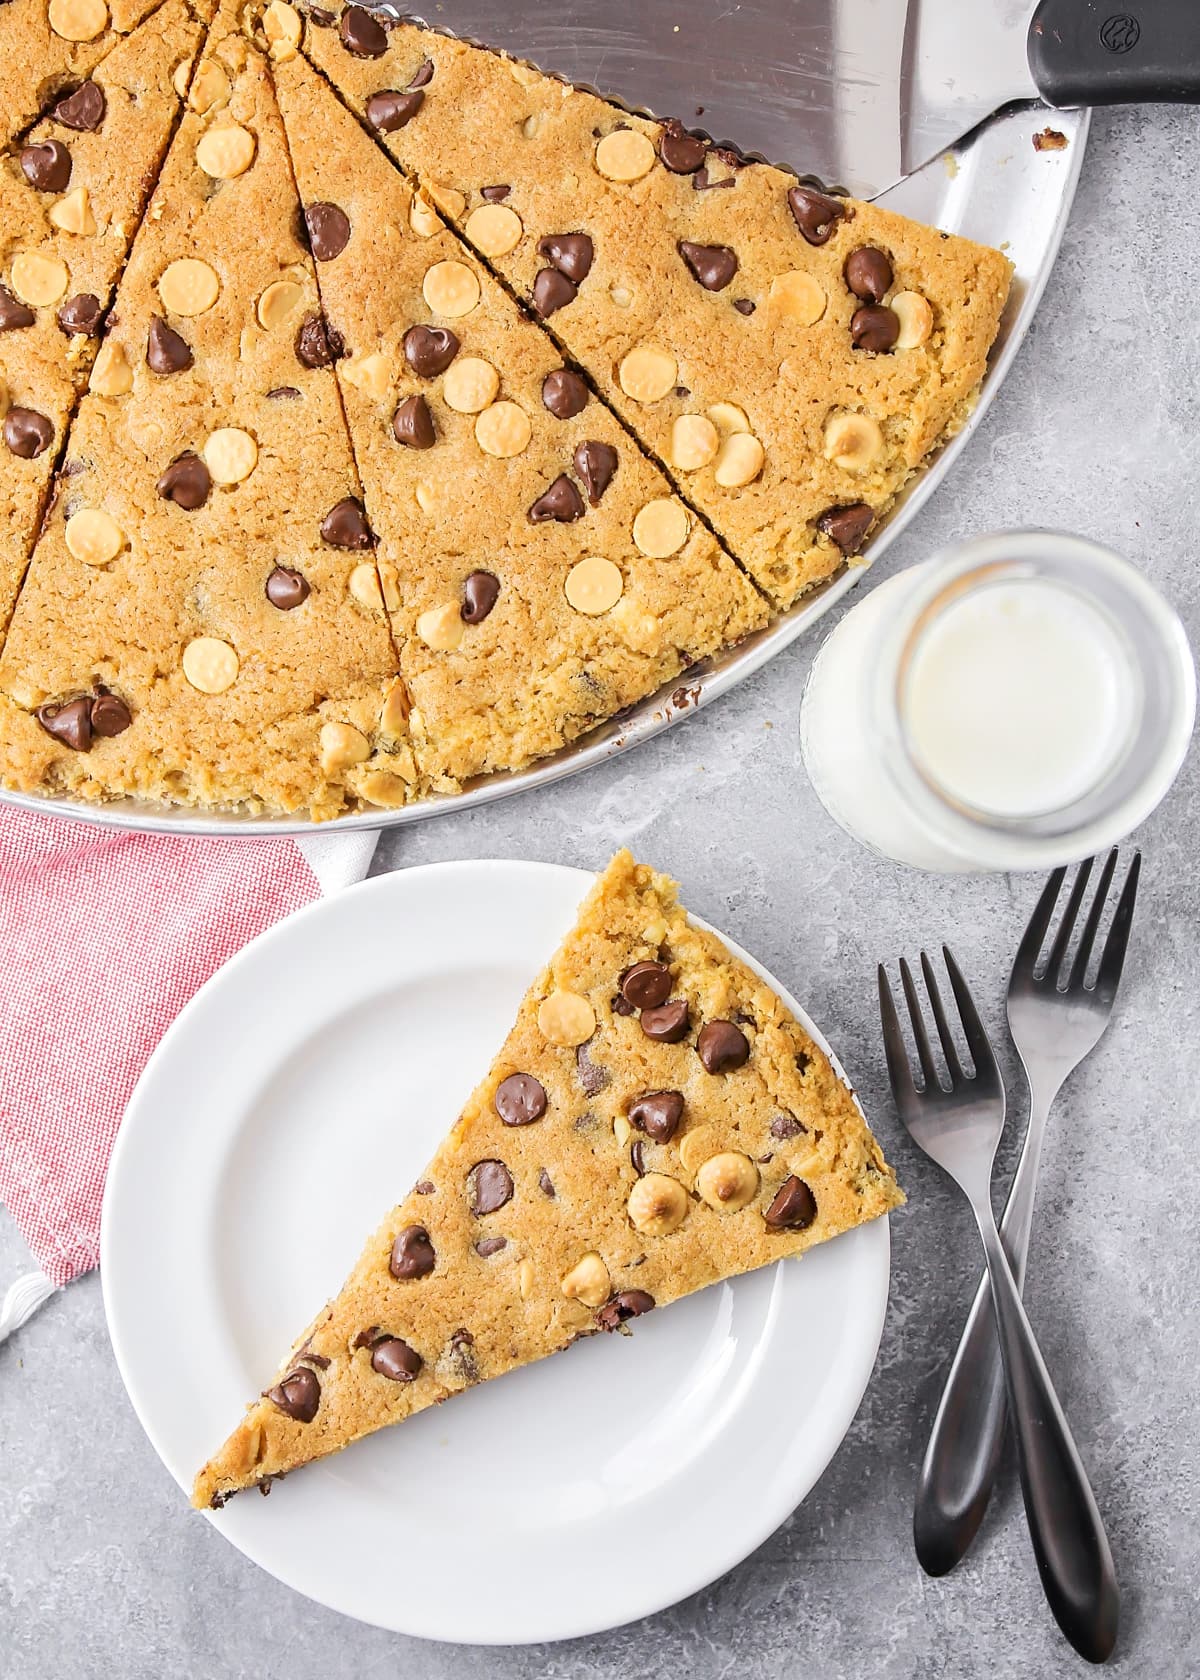 Slice of giant chocolate chip cookie